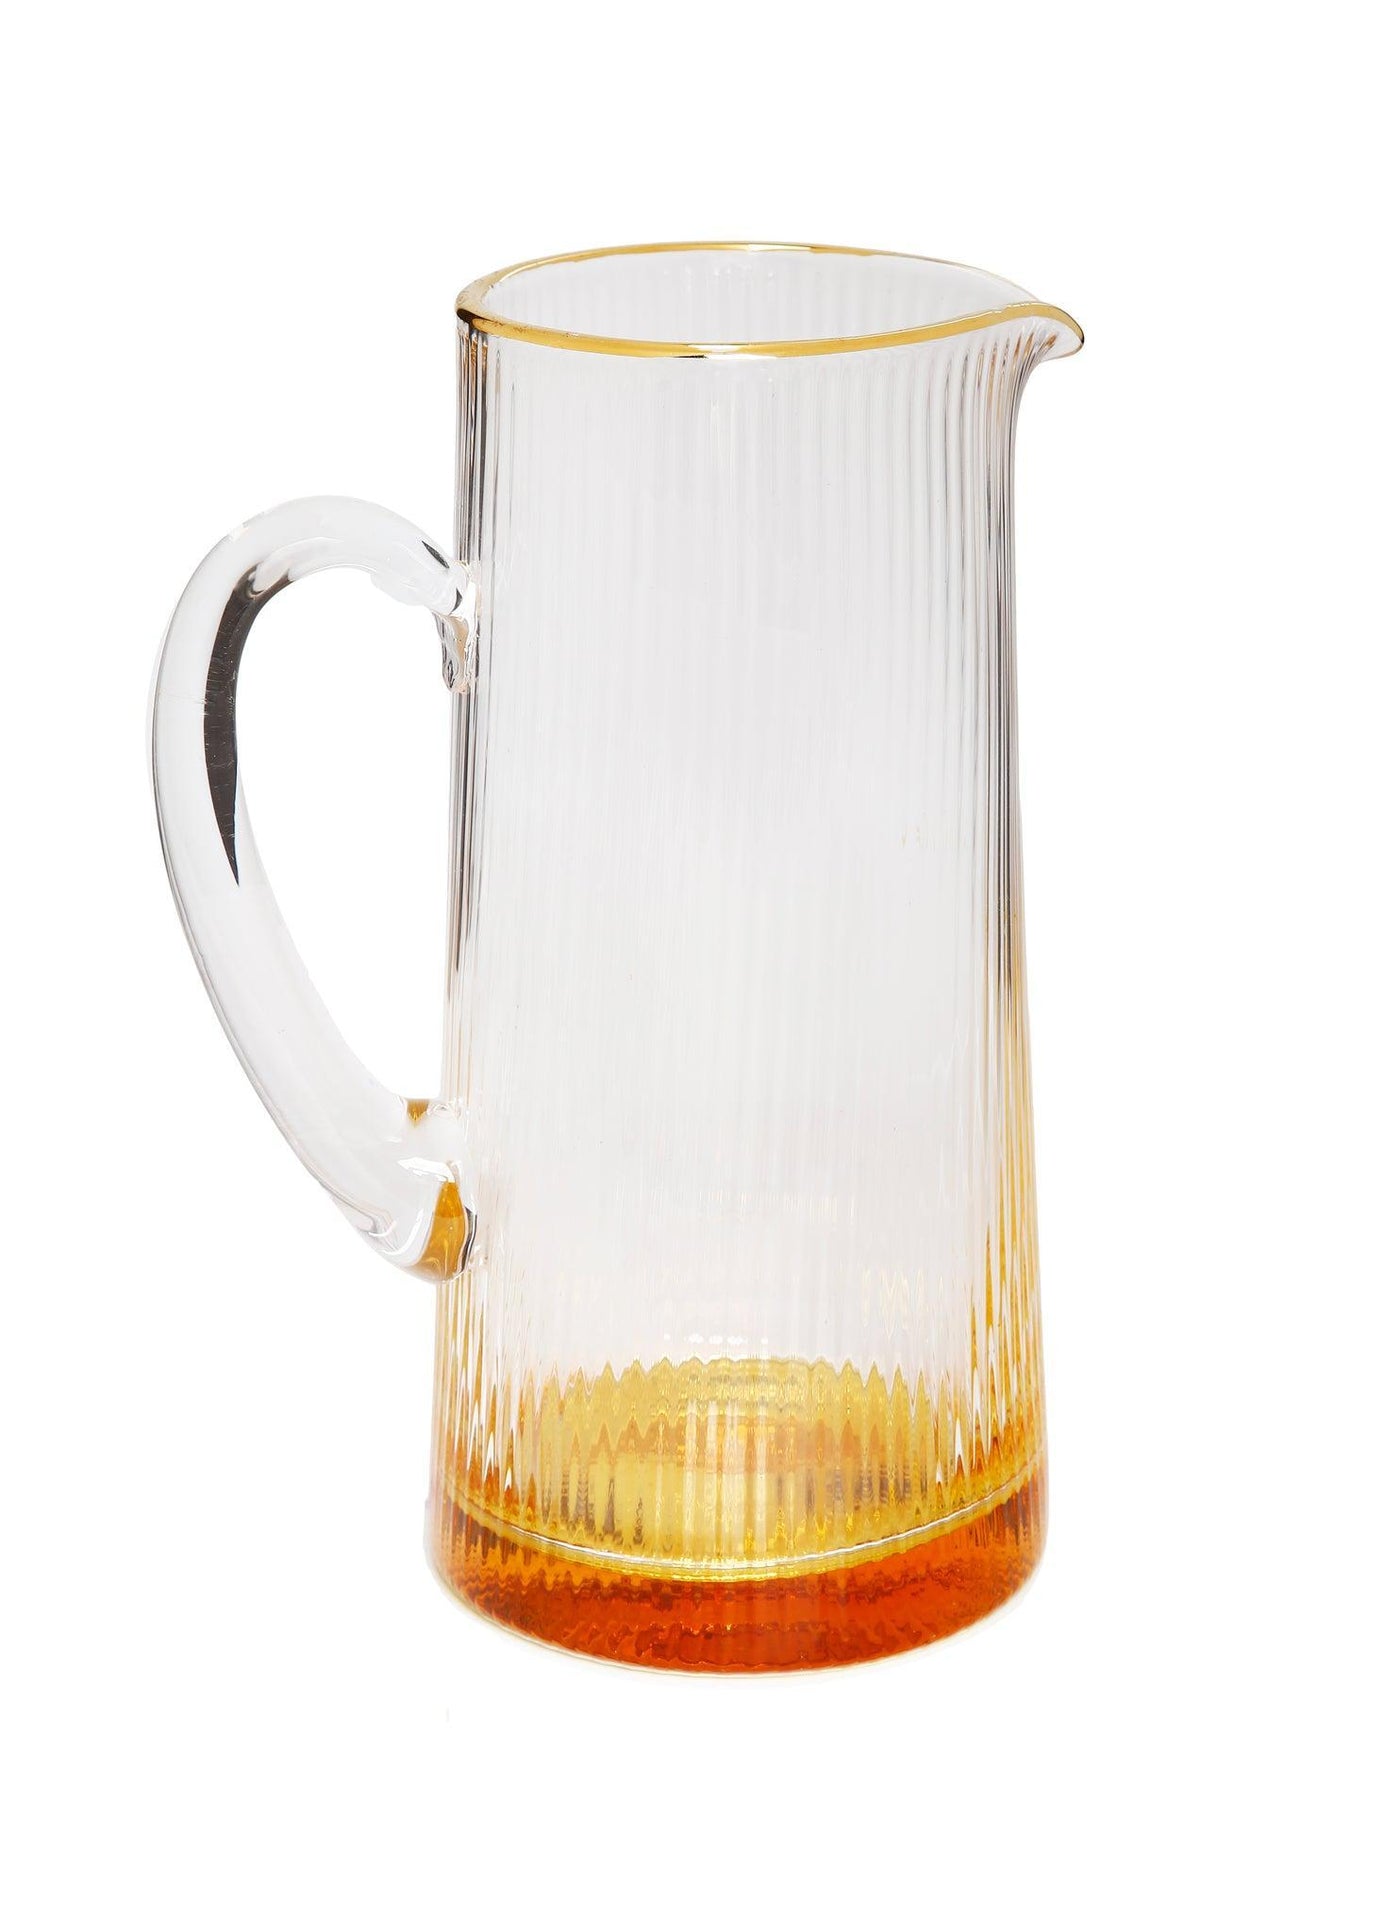 Pitcher with Gold Dipped Bottom and Gold Rim - Set With Style